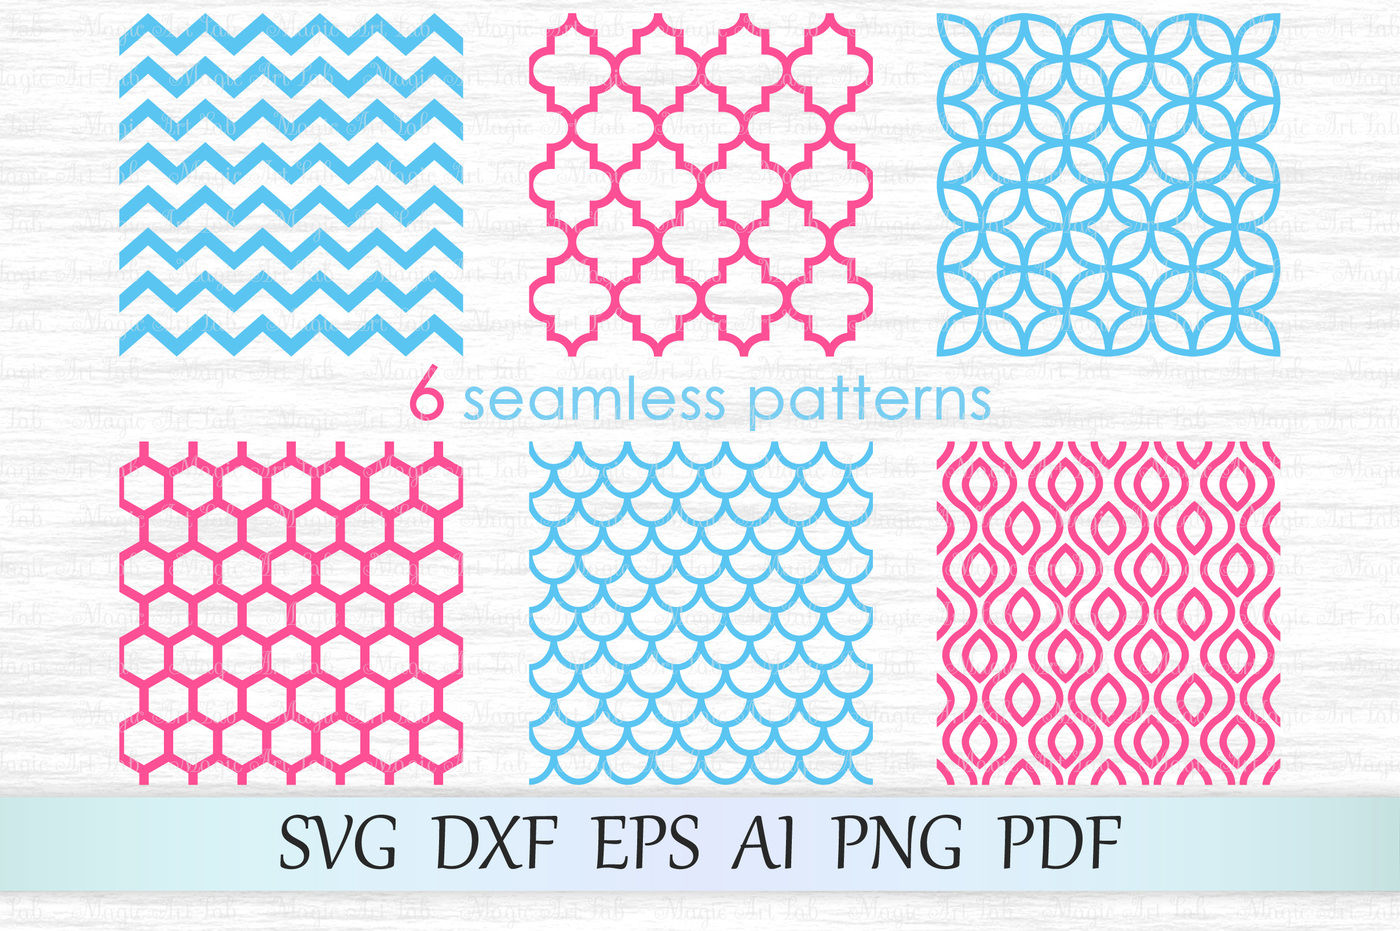 Download Seamless Patterns Mermaid Background Svg Dxf Eps Ai Png Pdf By Magicartlab Thehungryjpeg Com